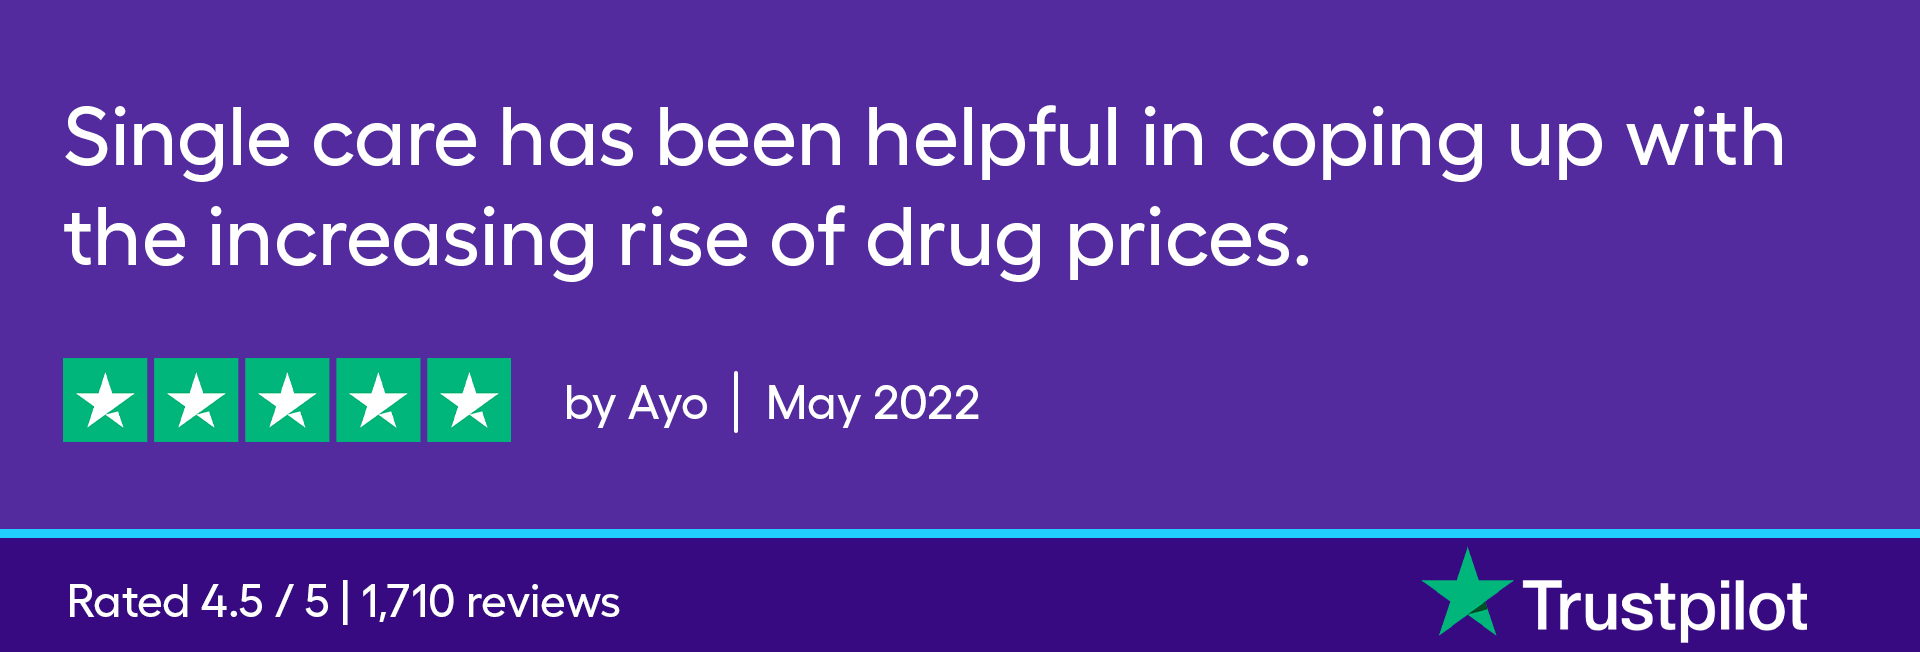 Single care has been helpful in coping up with the increasing rise of drug prices.